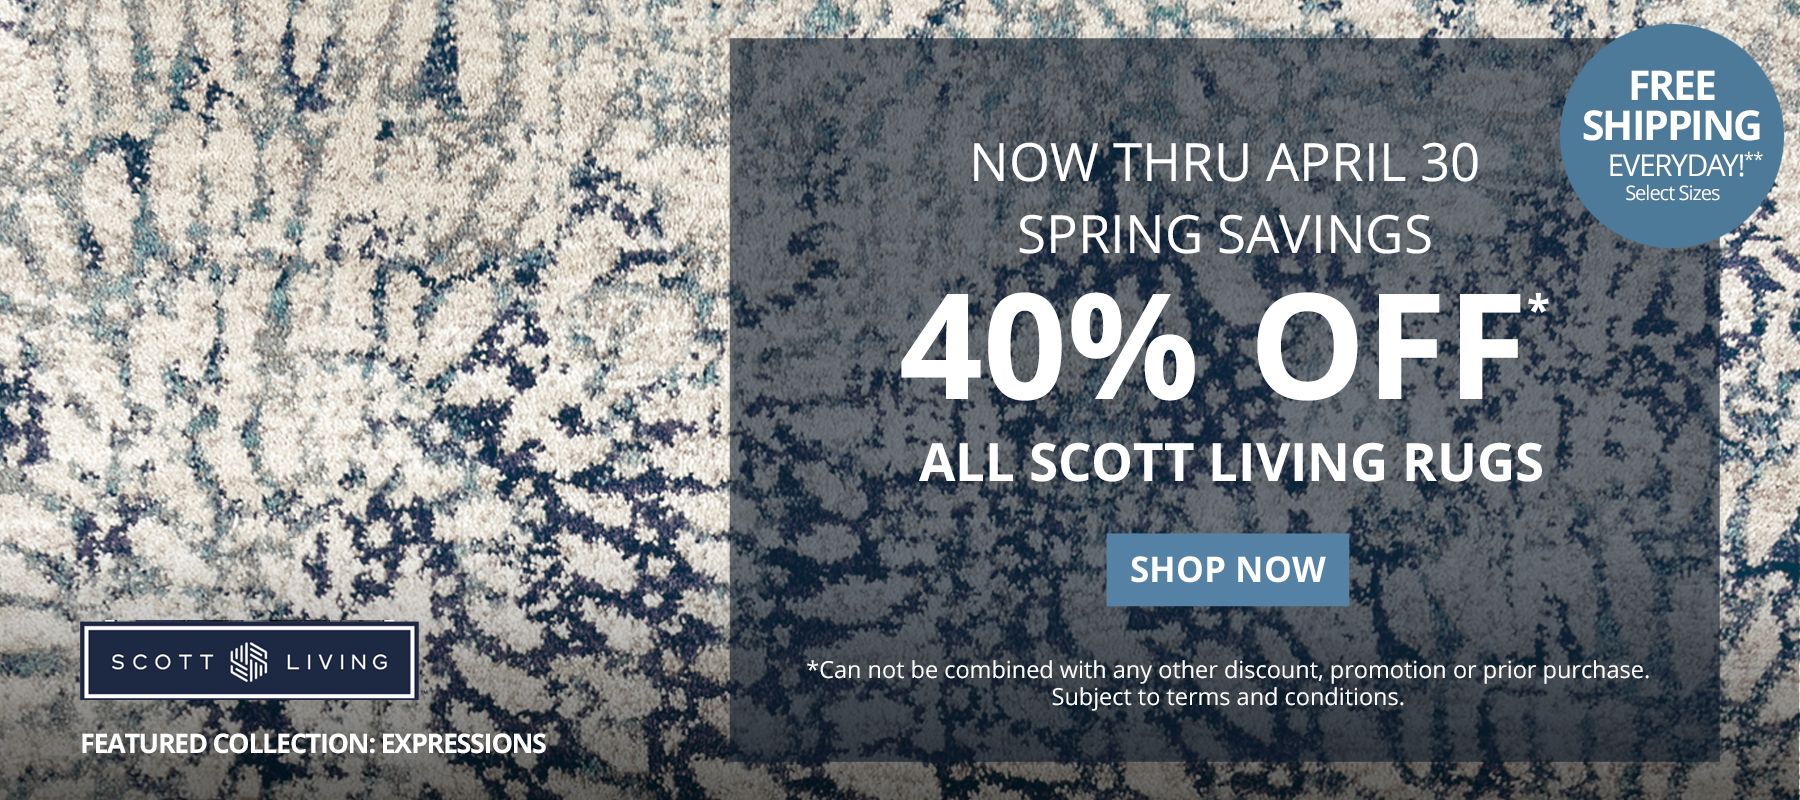 Now Thru April 30. Spring Savings. 40% Off* All Scott Living Rugs. Free Shipping Everyday!** Select Sizes. *Can not be combined with any other discount, promotion or prior purchase. Subject to terms and conditions. Shop Now.